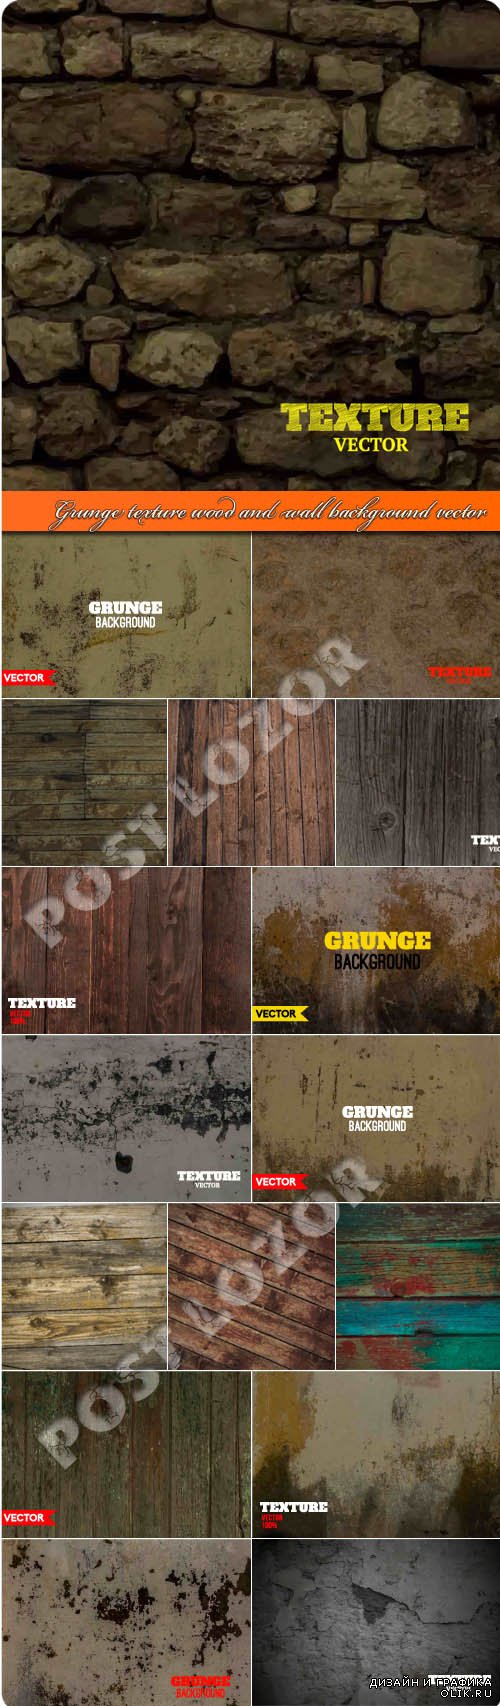 Grunge texture wood and wall background vector